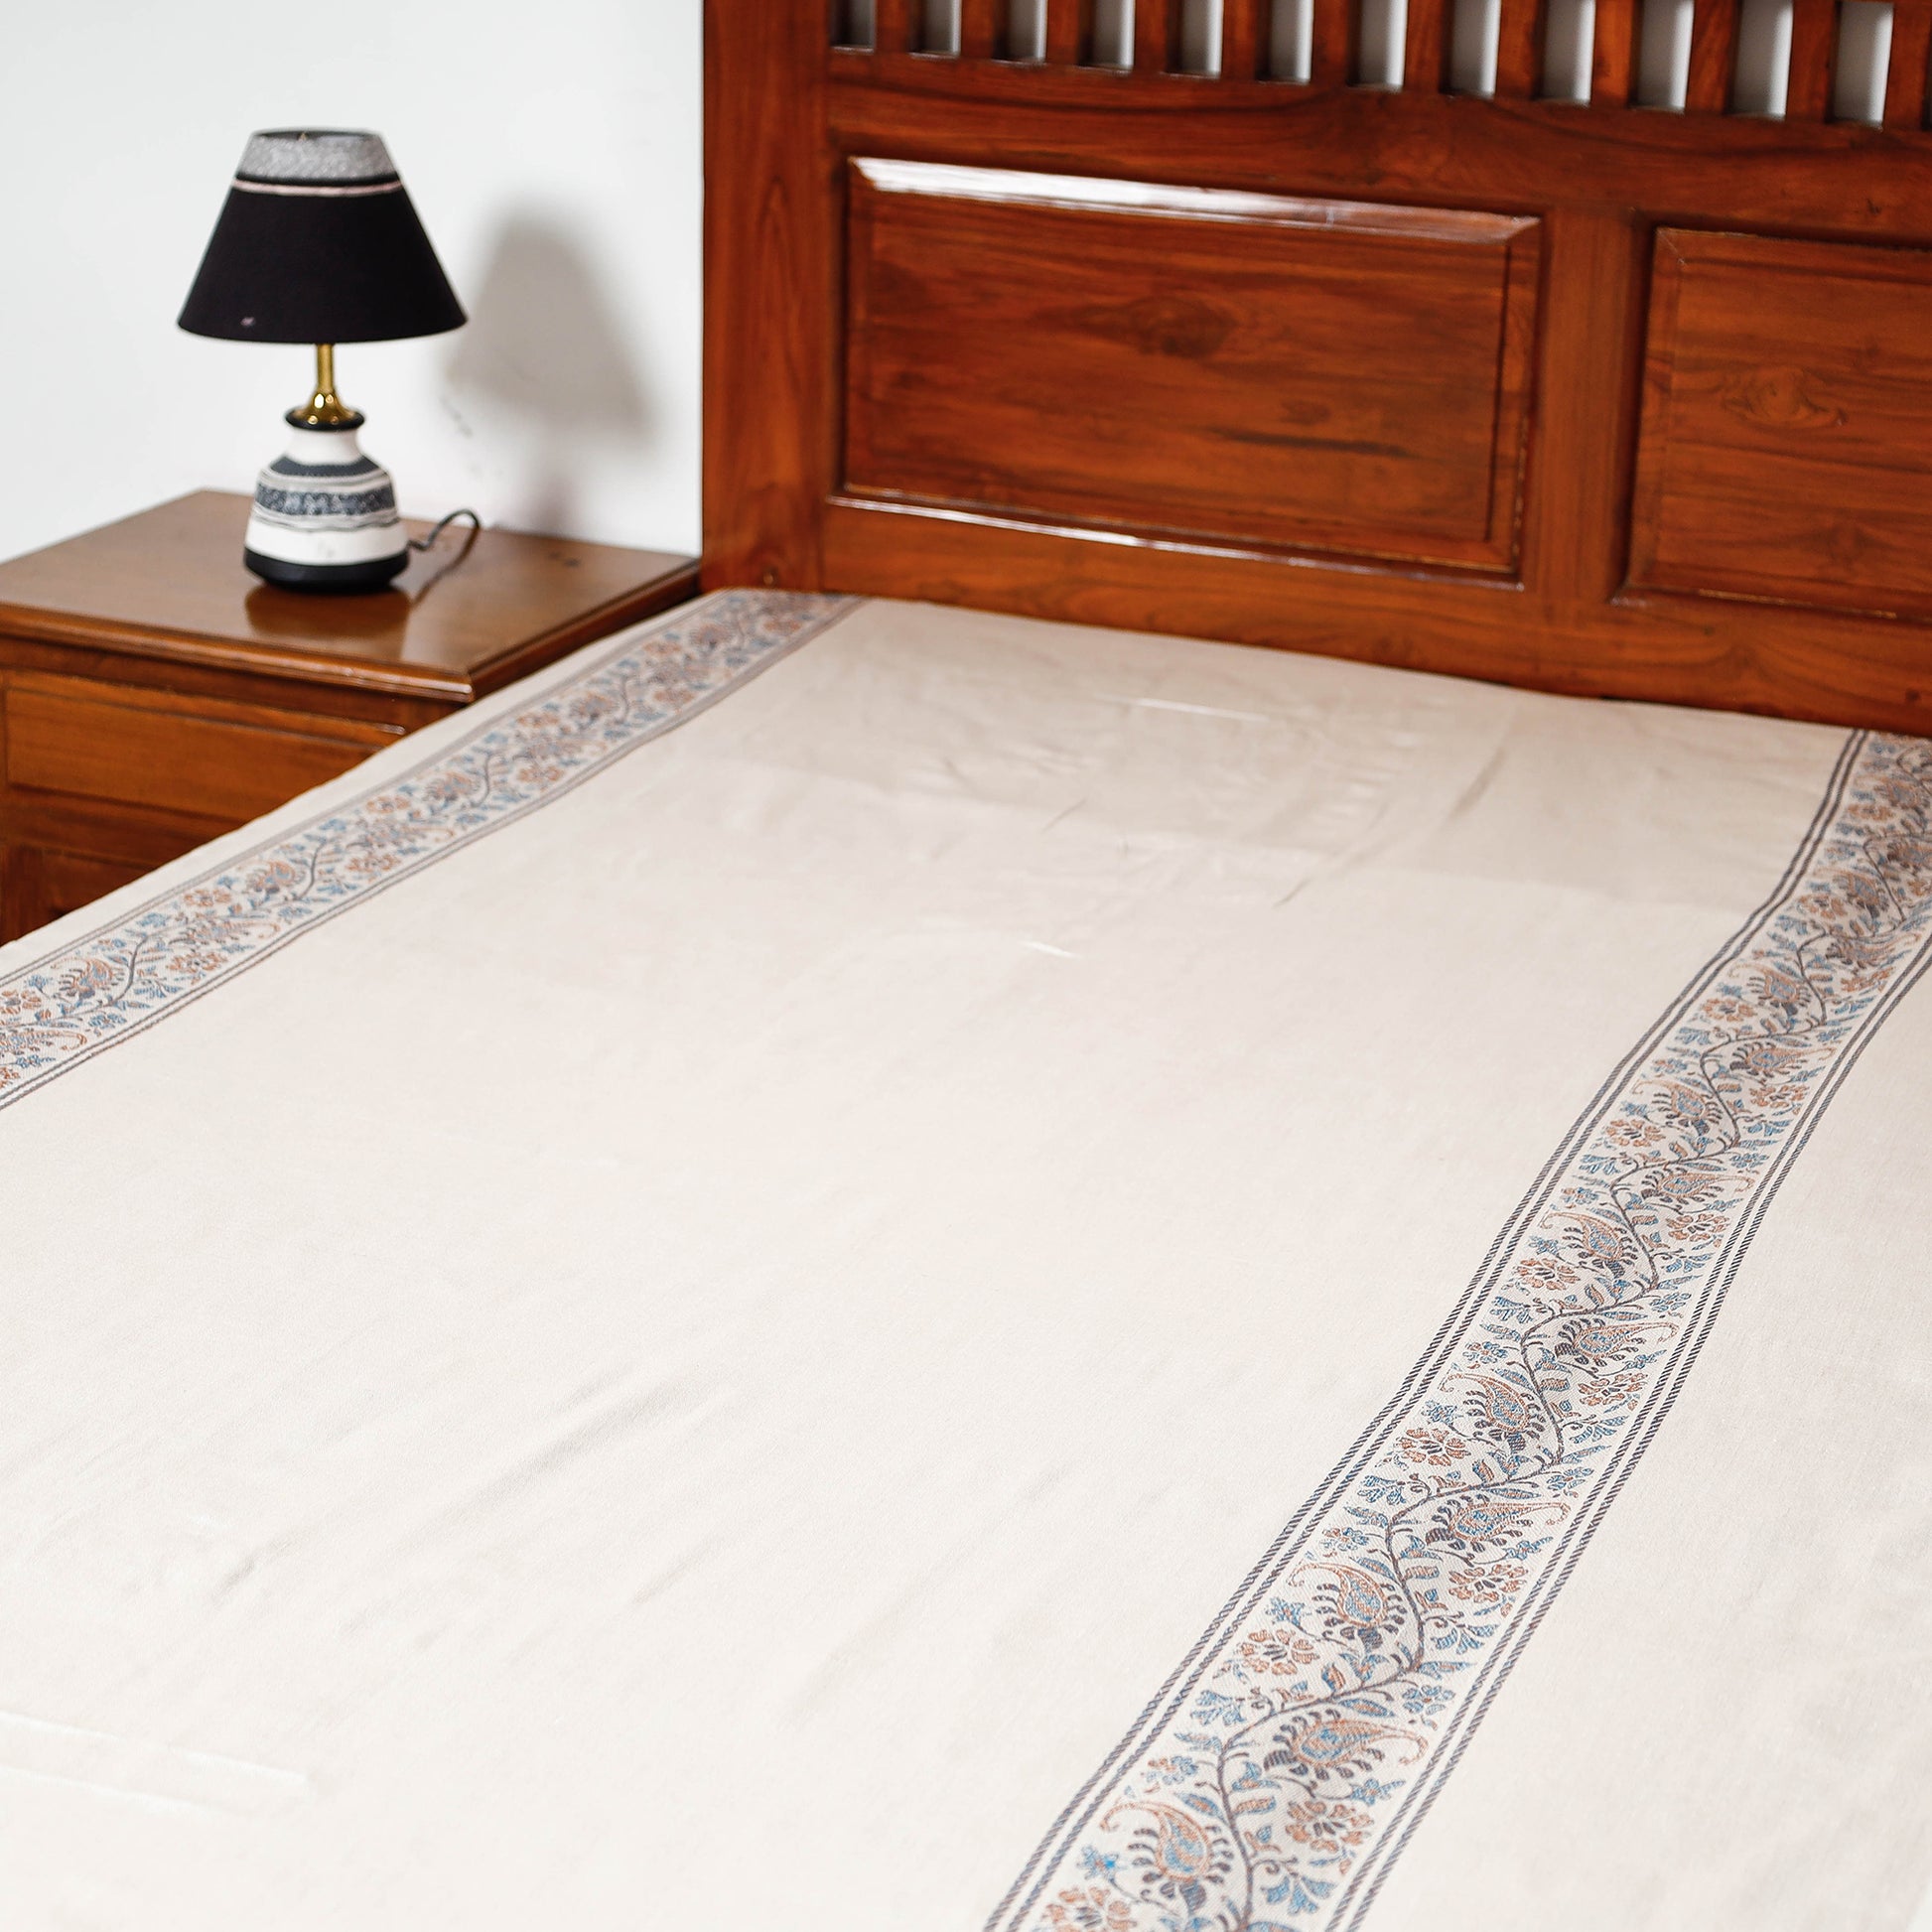 himroo single bed cover